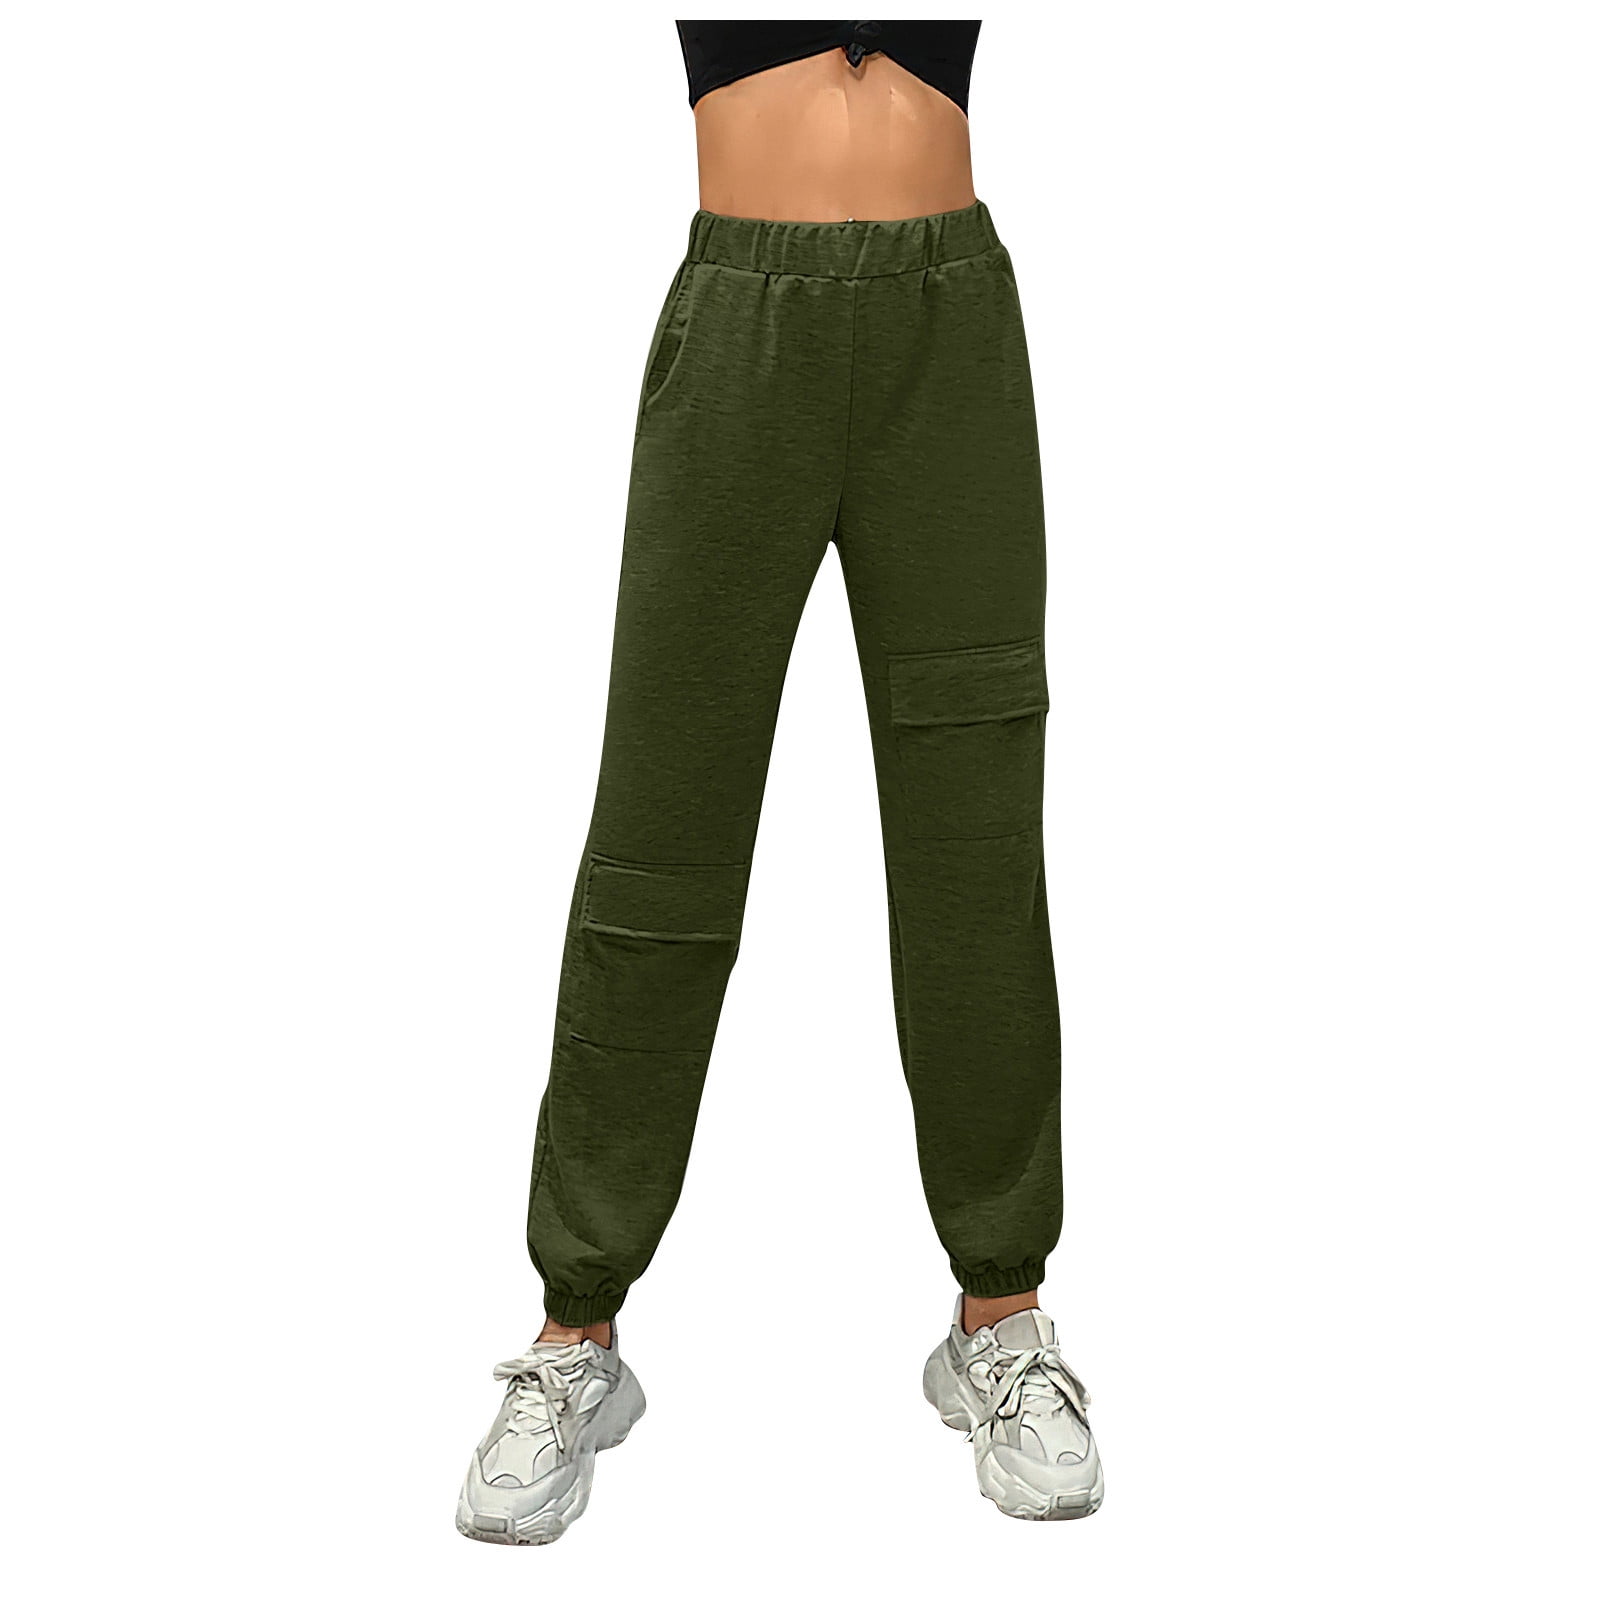 Women's Mid Waist Slim Fit Jogger Drawstring Skinny Stretch Cargo Pants  Casual Pull-On Butt Lift Trousers Sweatpants